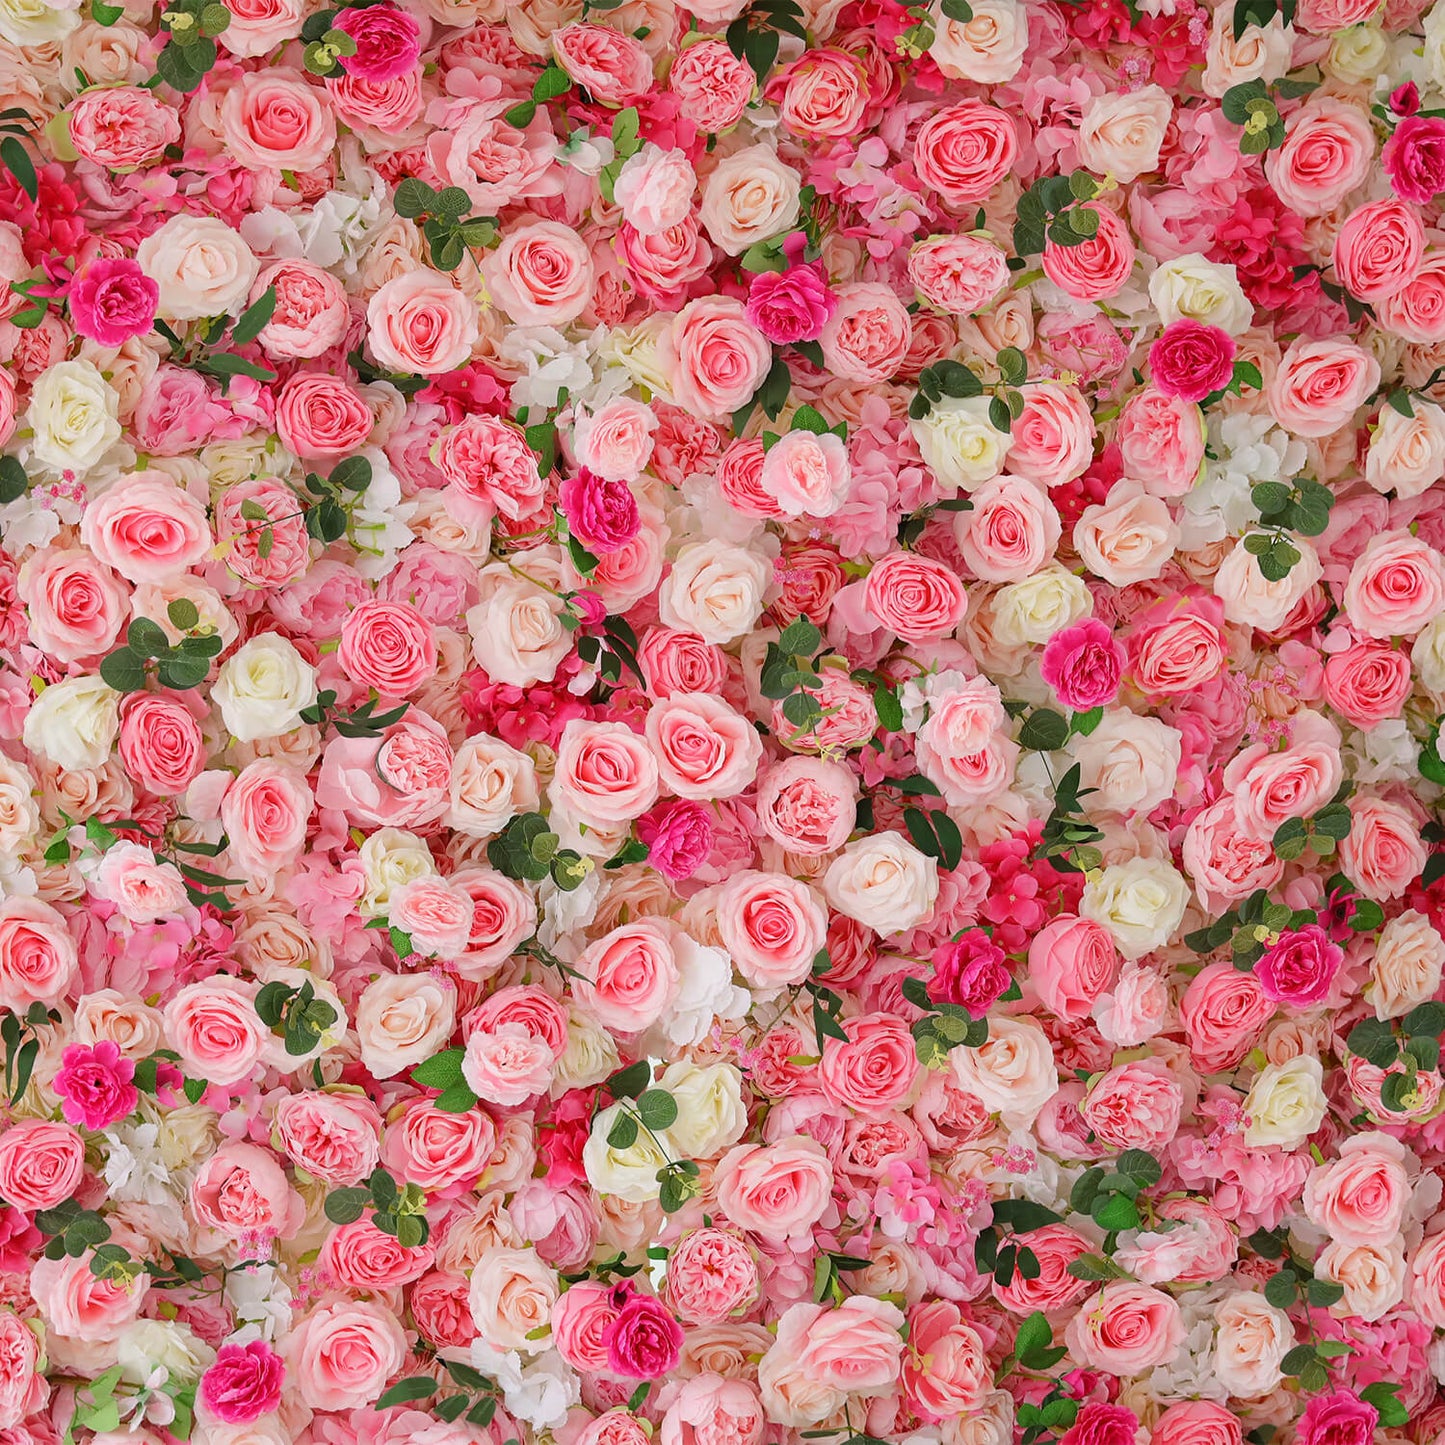 Pink Rose Flower Wall Backdrop for Birthday&Baby Shower Party Decorations-ubackdrop